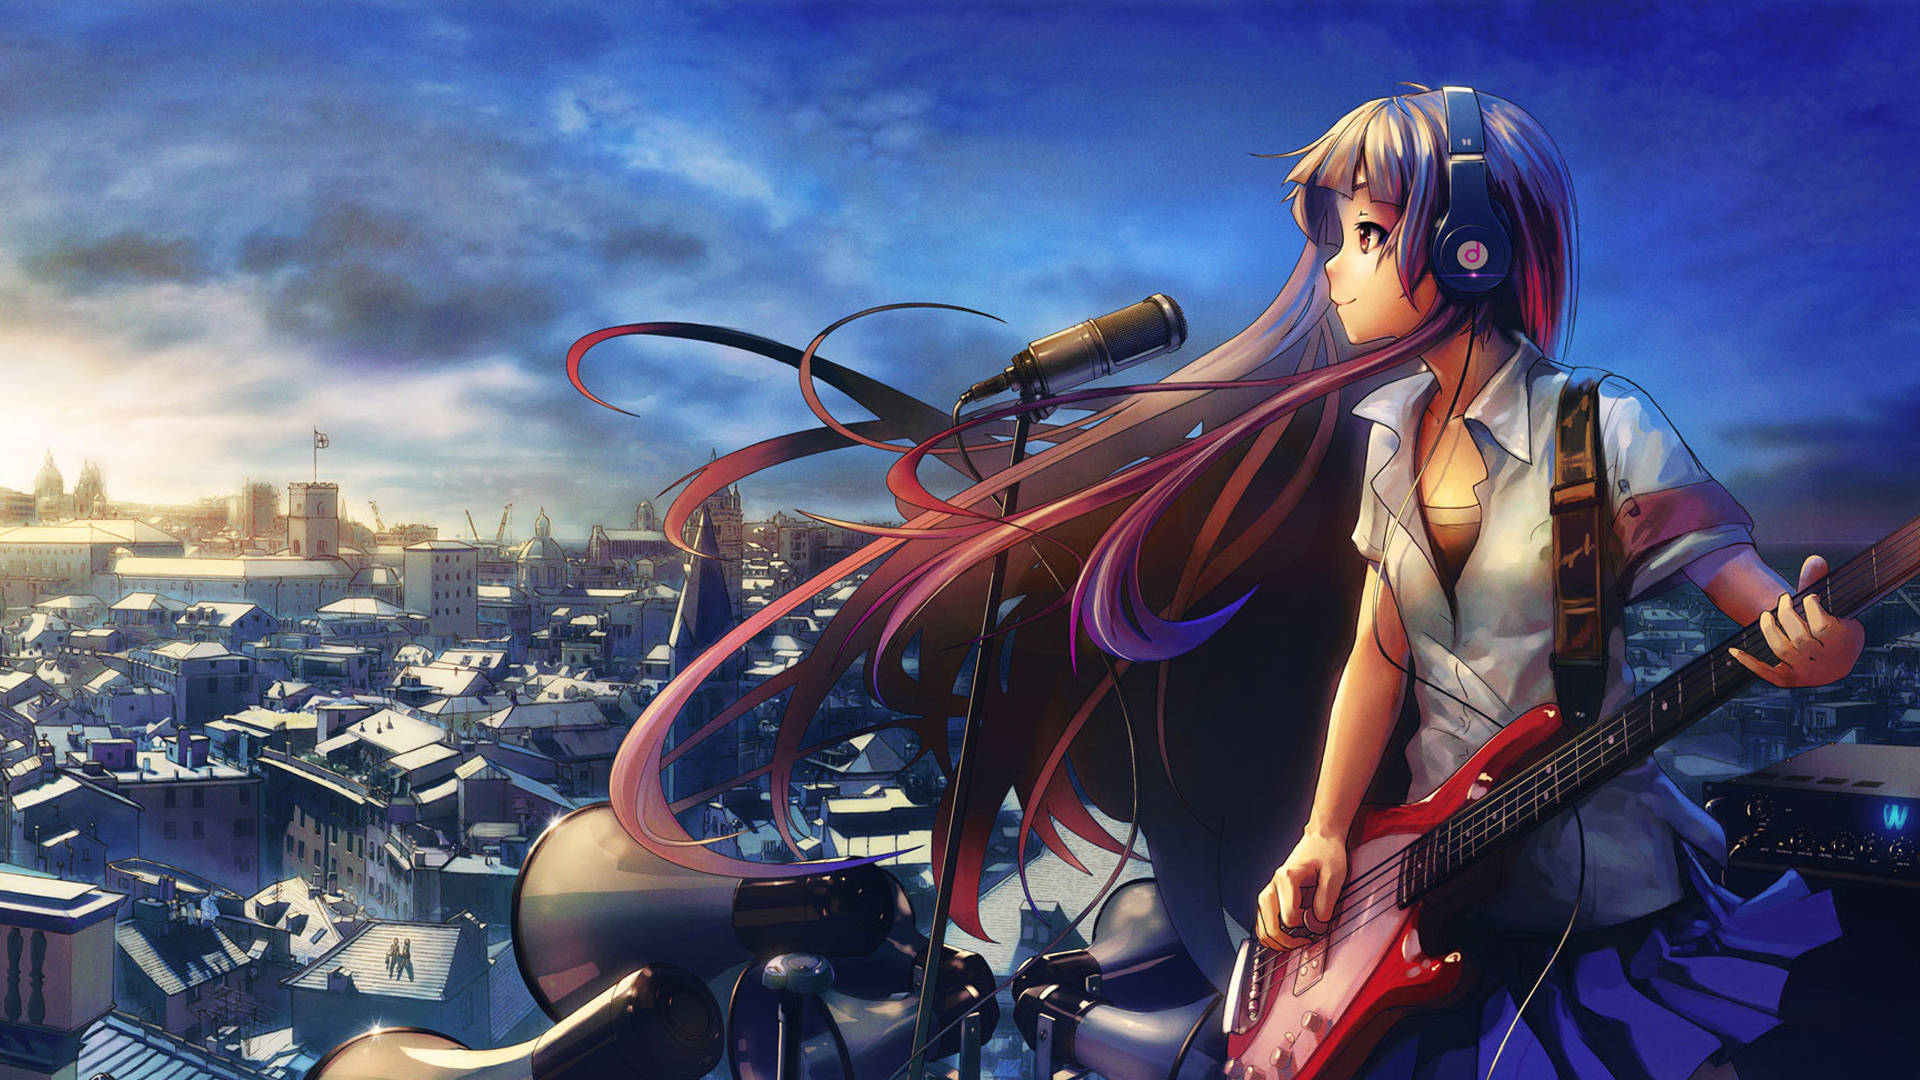 1920x1080 Full Hd Anime Girl Playing Guitar On Rooftop Wallpaper